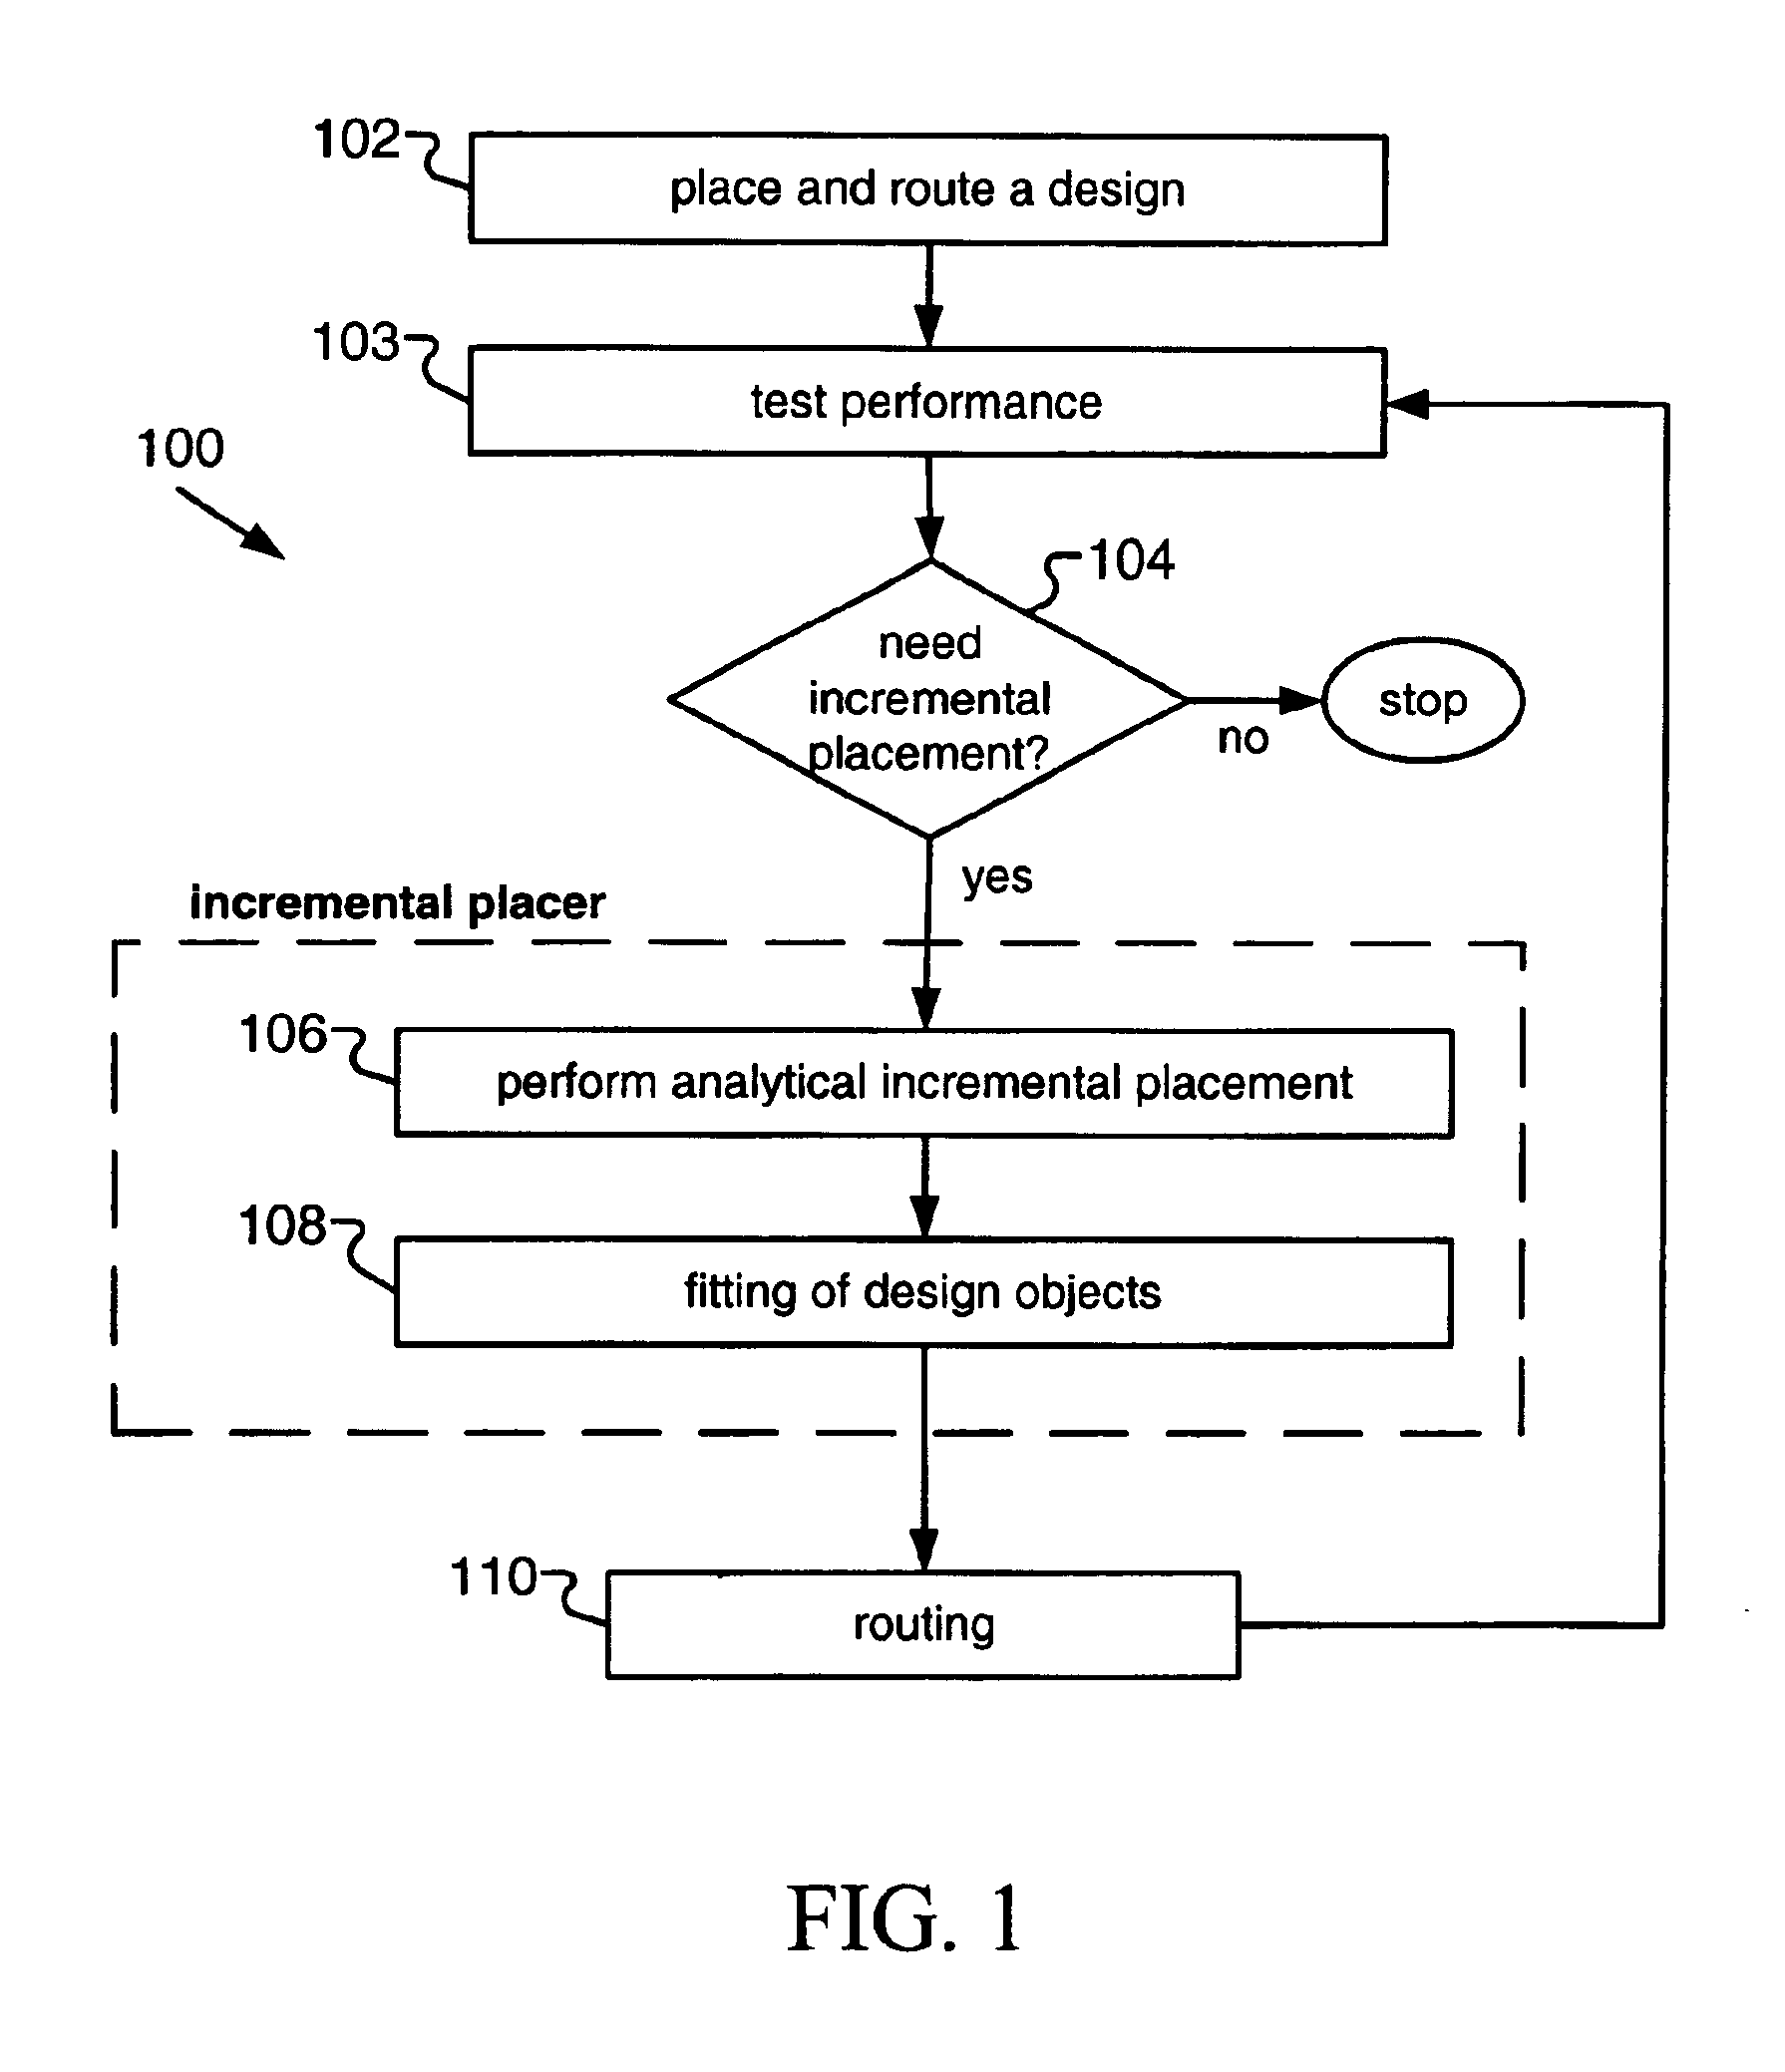 Incremental placement of design objects in integrated circuit design